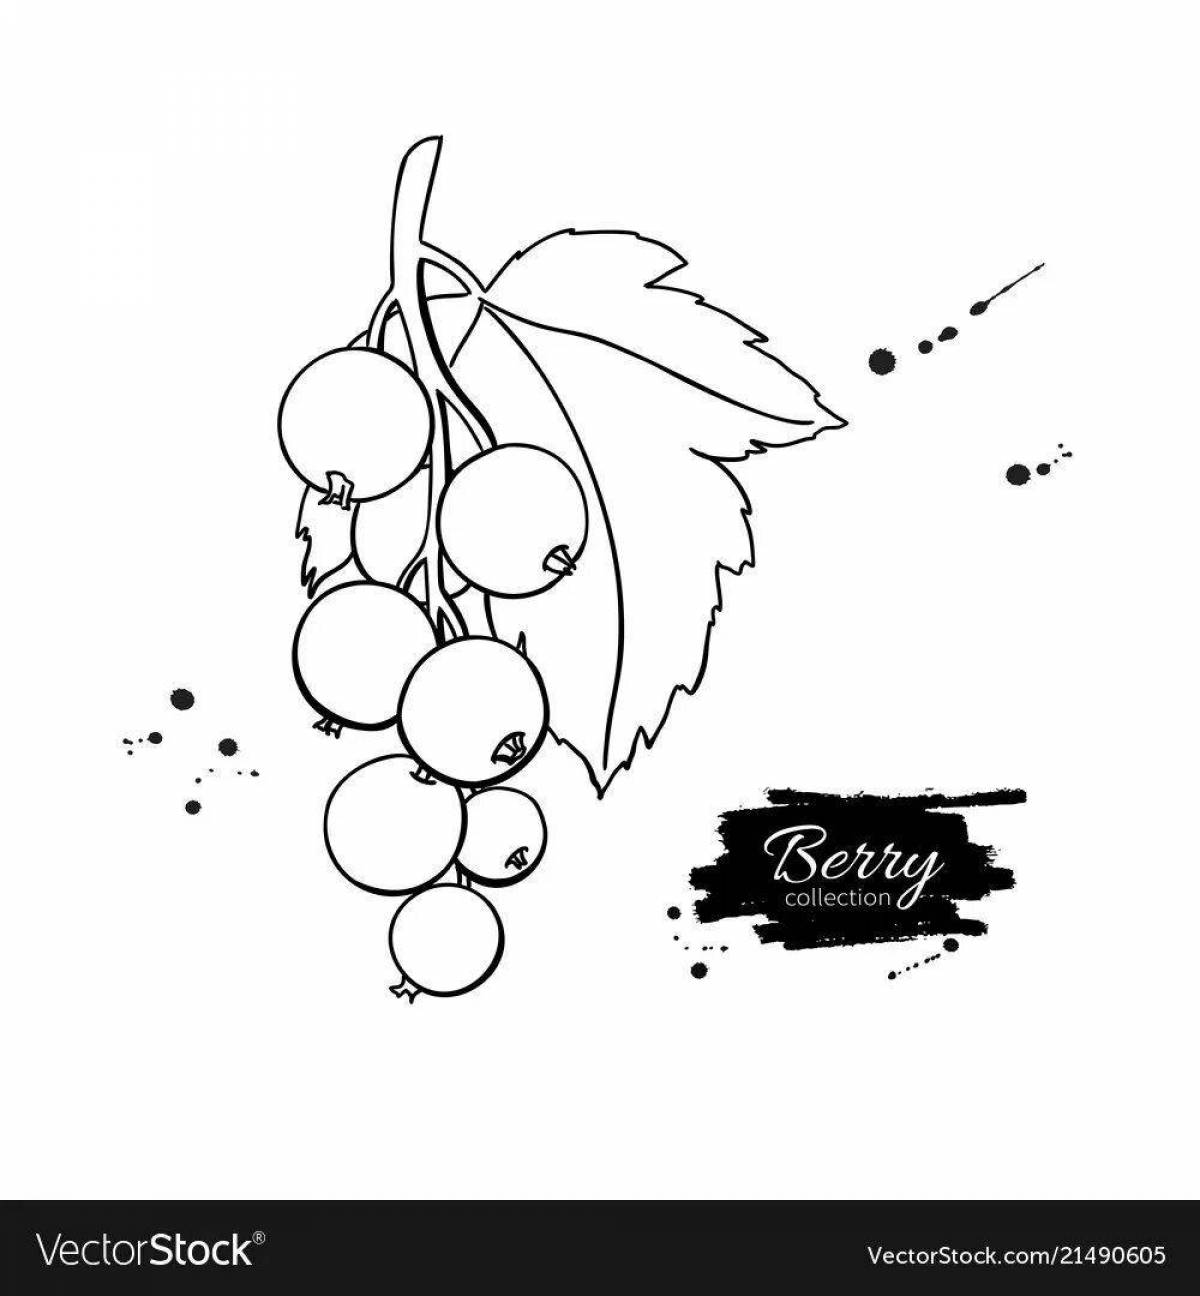 Fun currant coloring book for kids